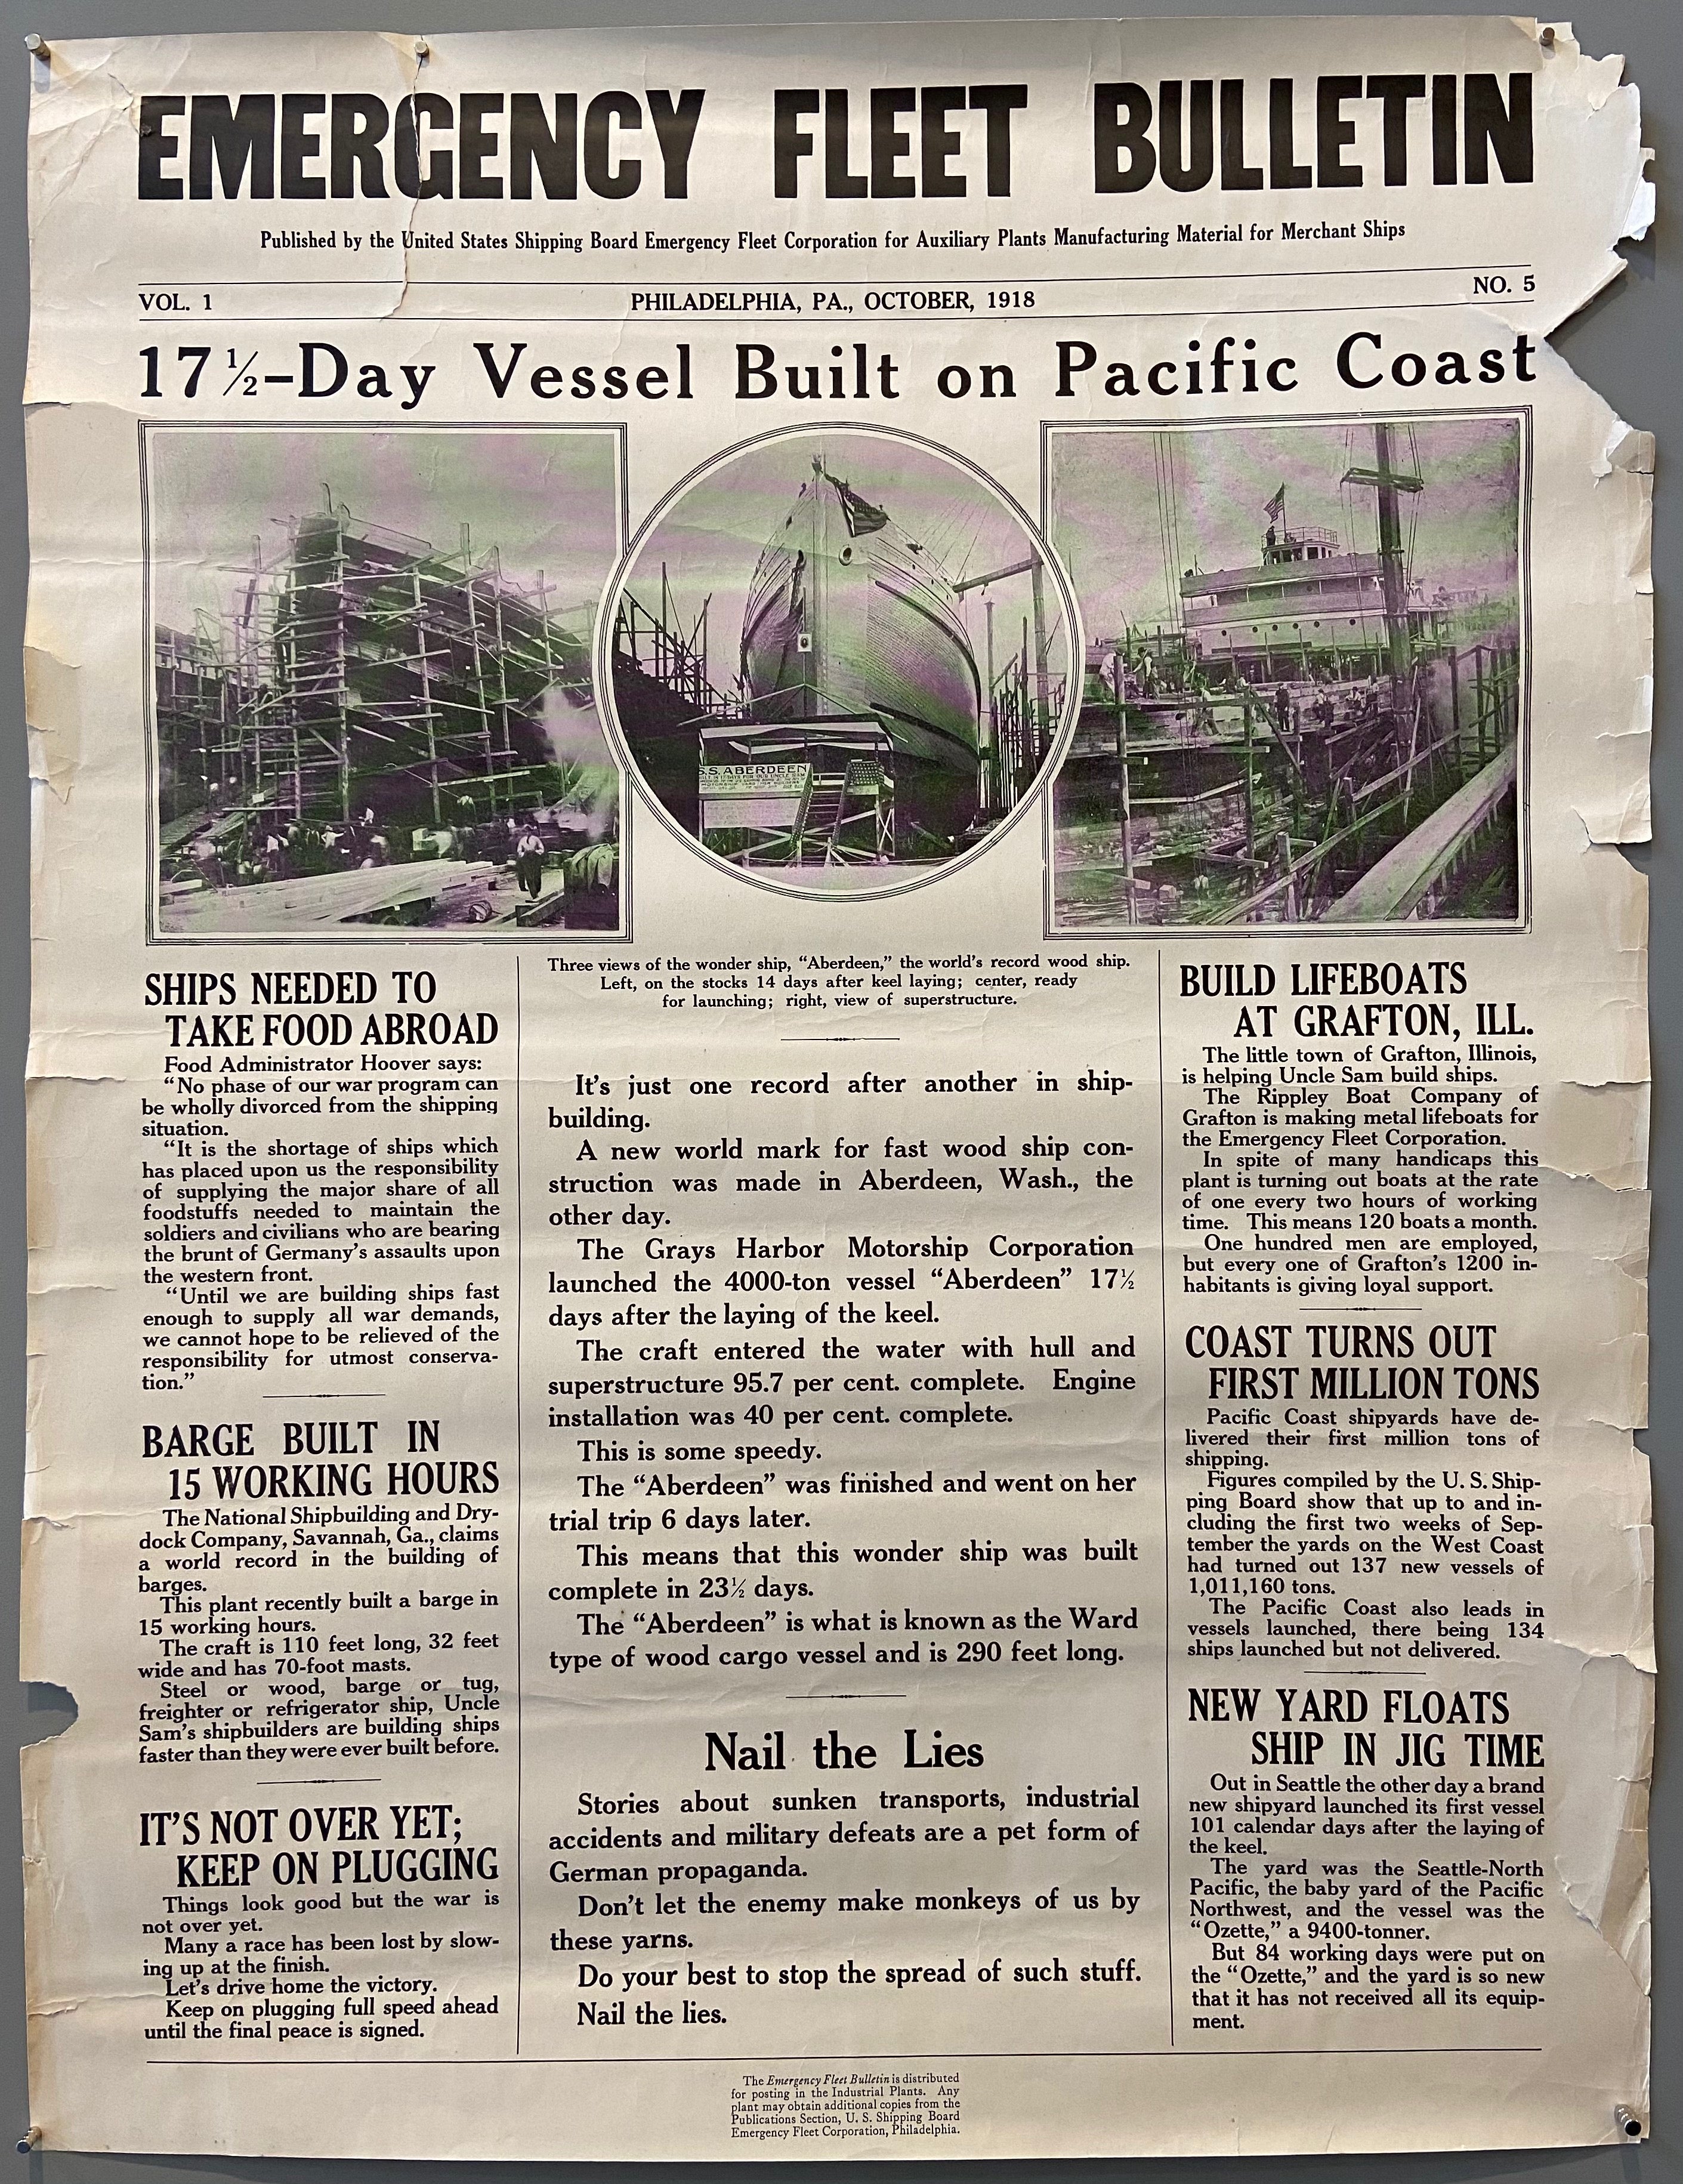 Bulletin with pictures of naval ship construction